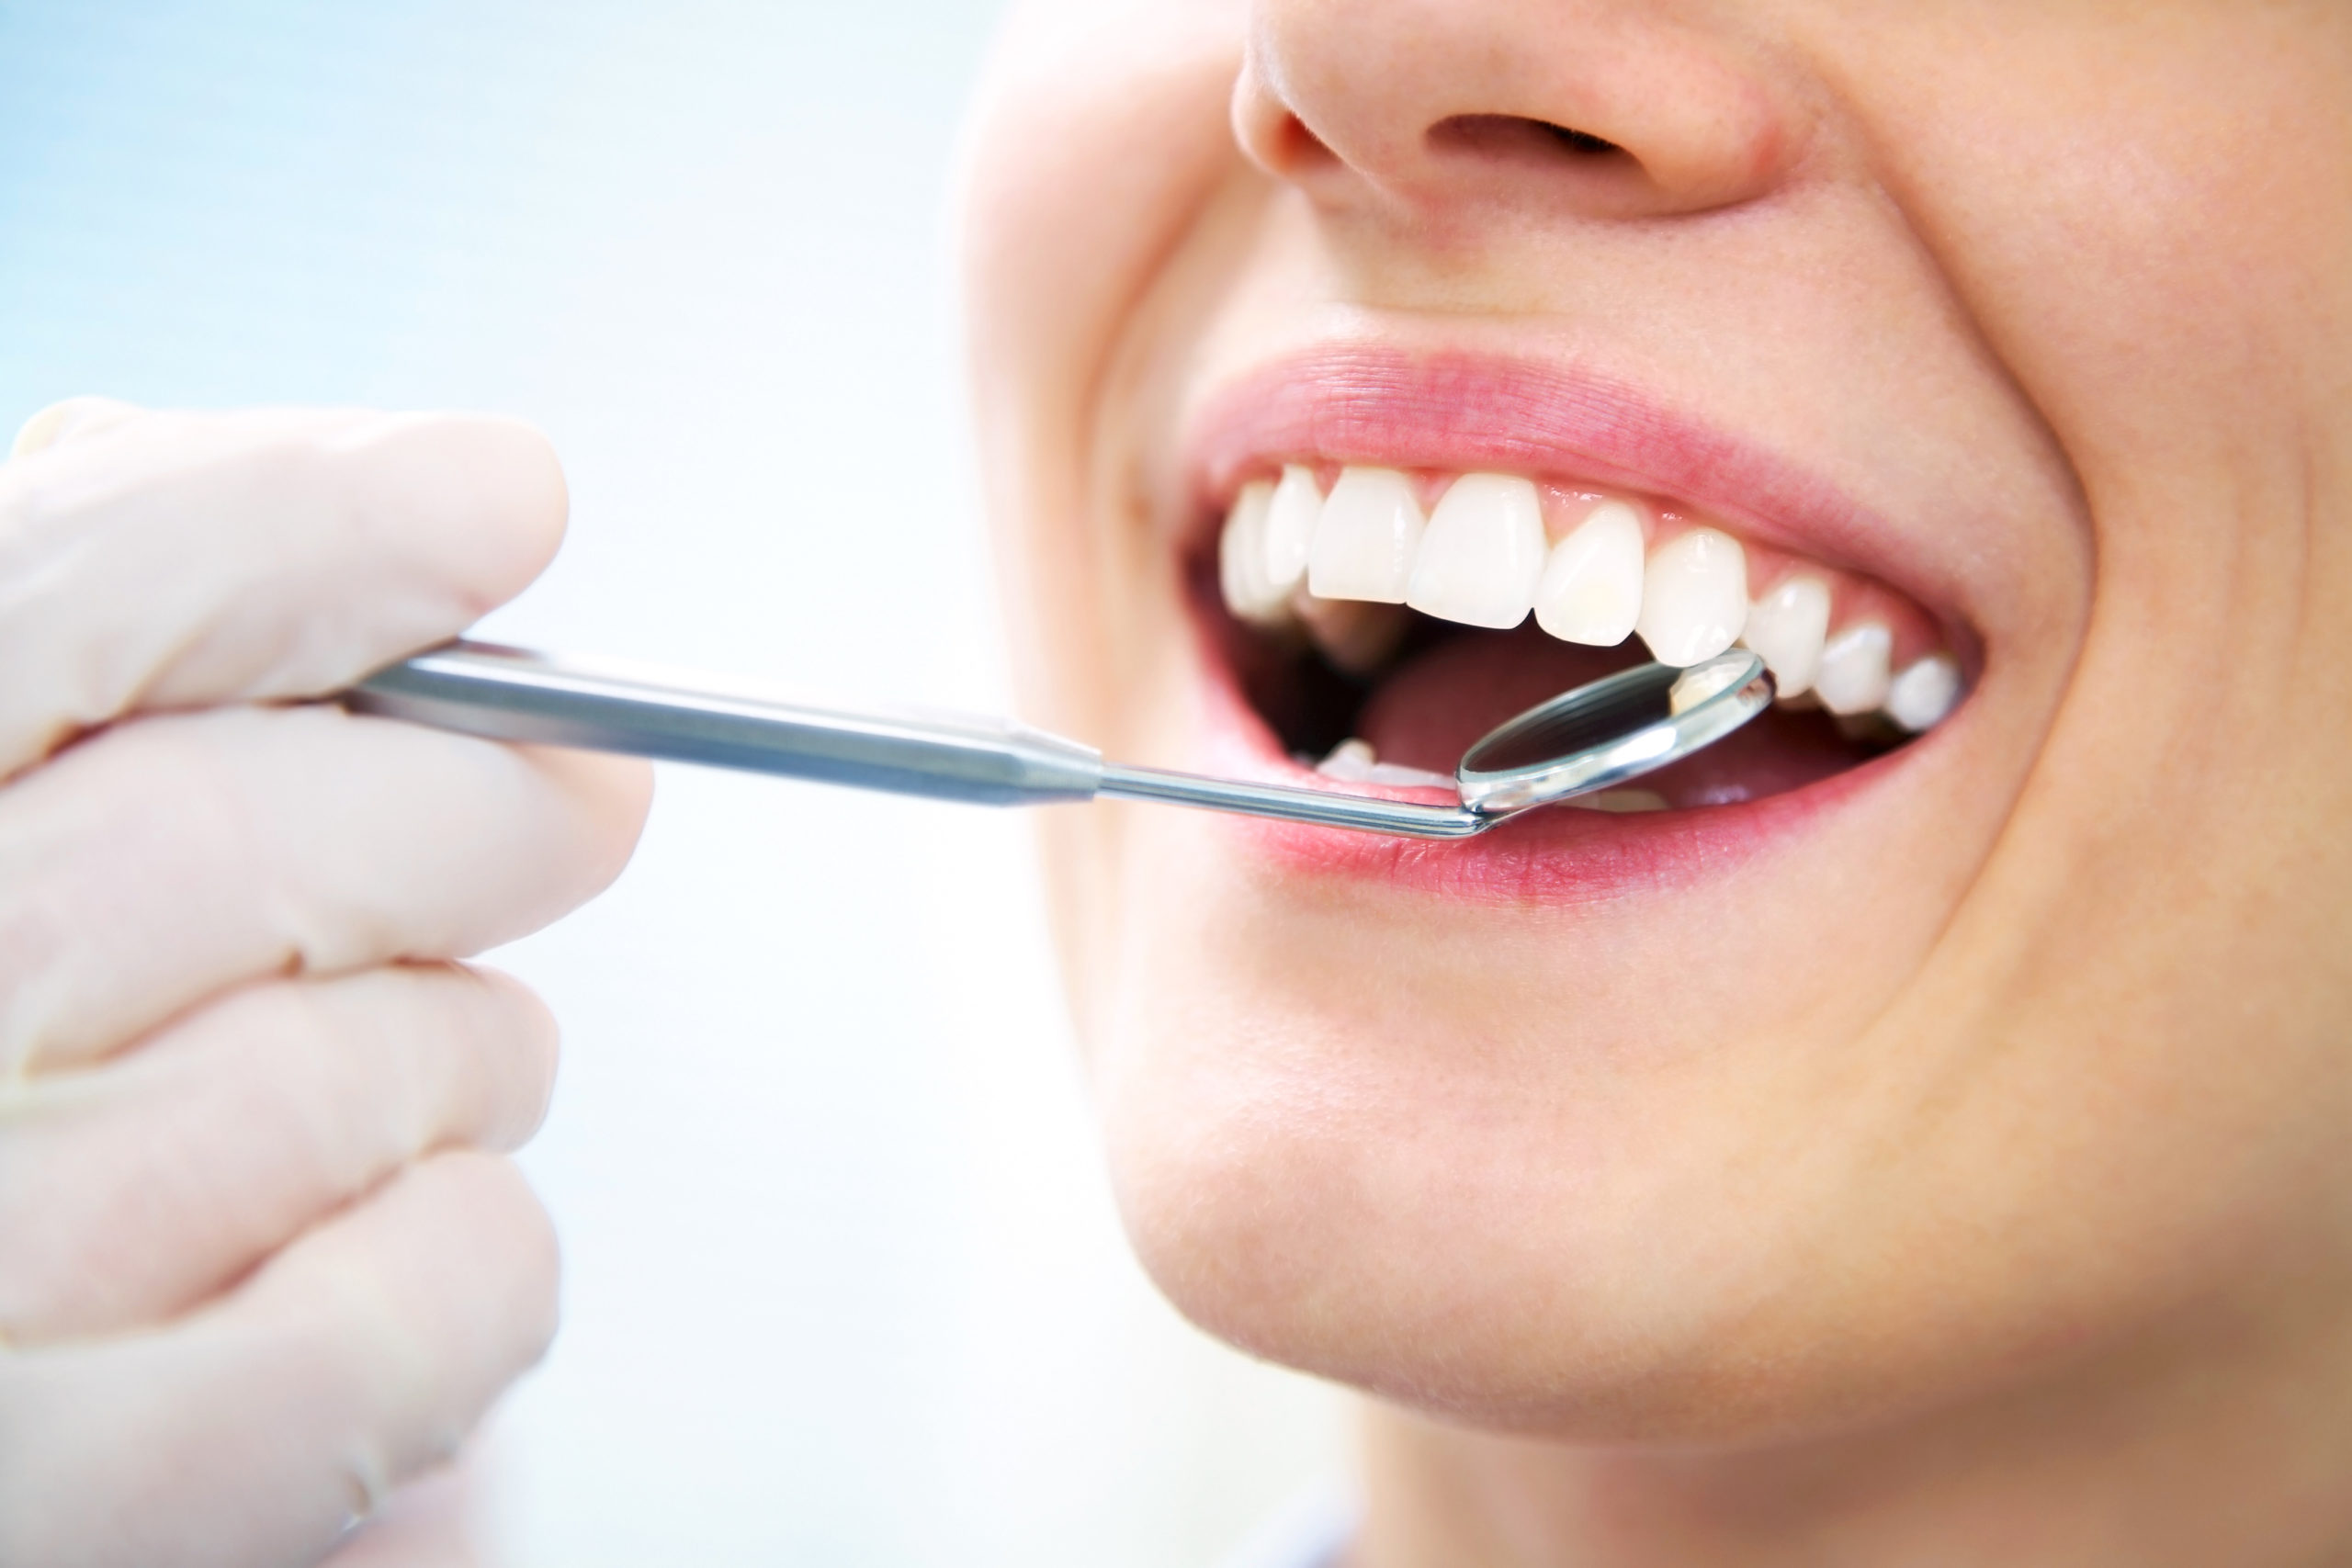 Are There Ways Cosmetic Dentistry In Mission Viejo, CA Can Improve The Look Of My Smile?